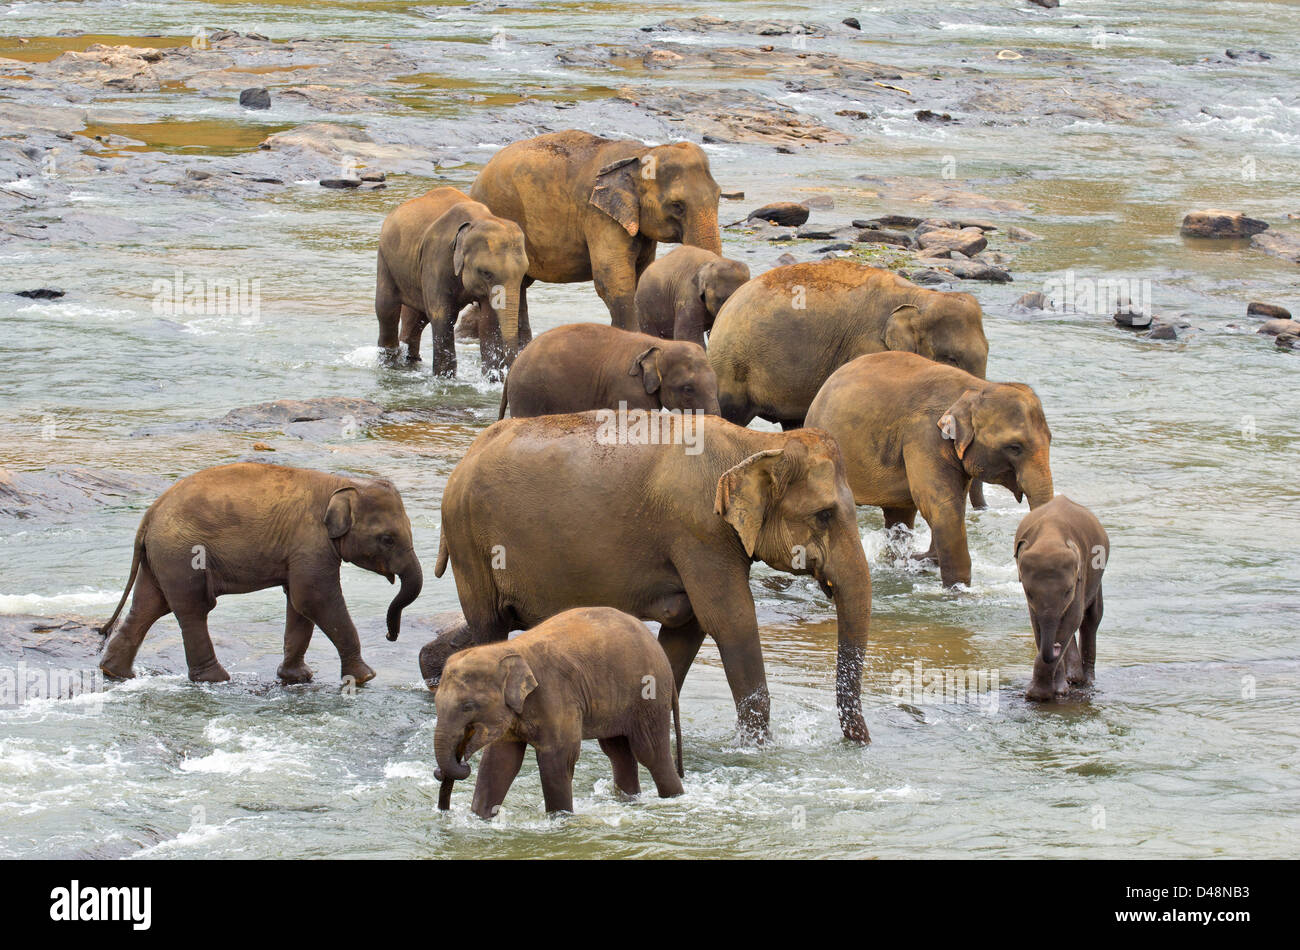 INDIAN ELEPHANT (Elephas maximus indicus) HERD  IN A RIVER Stock Photo